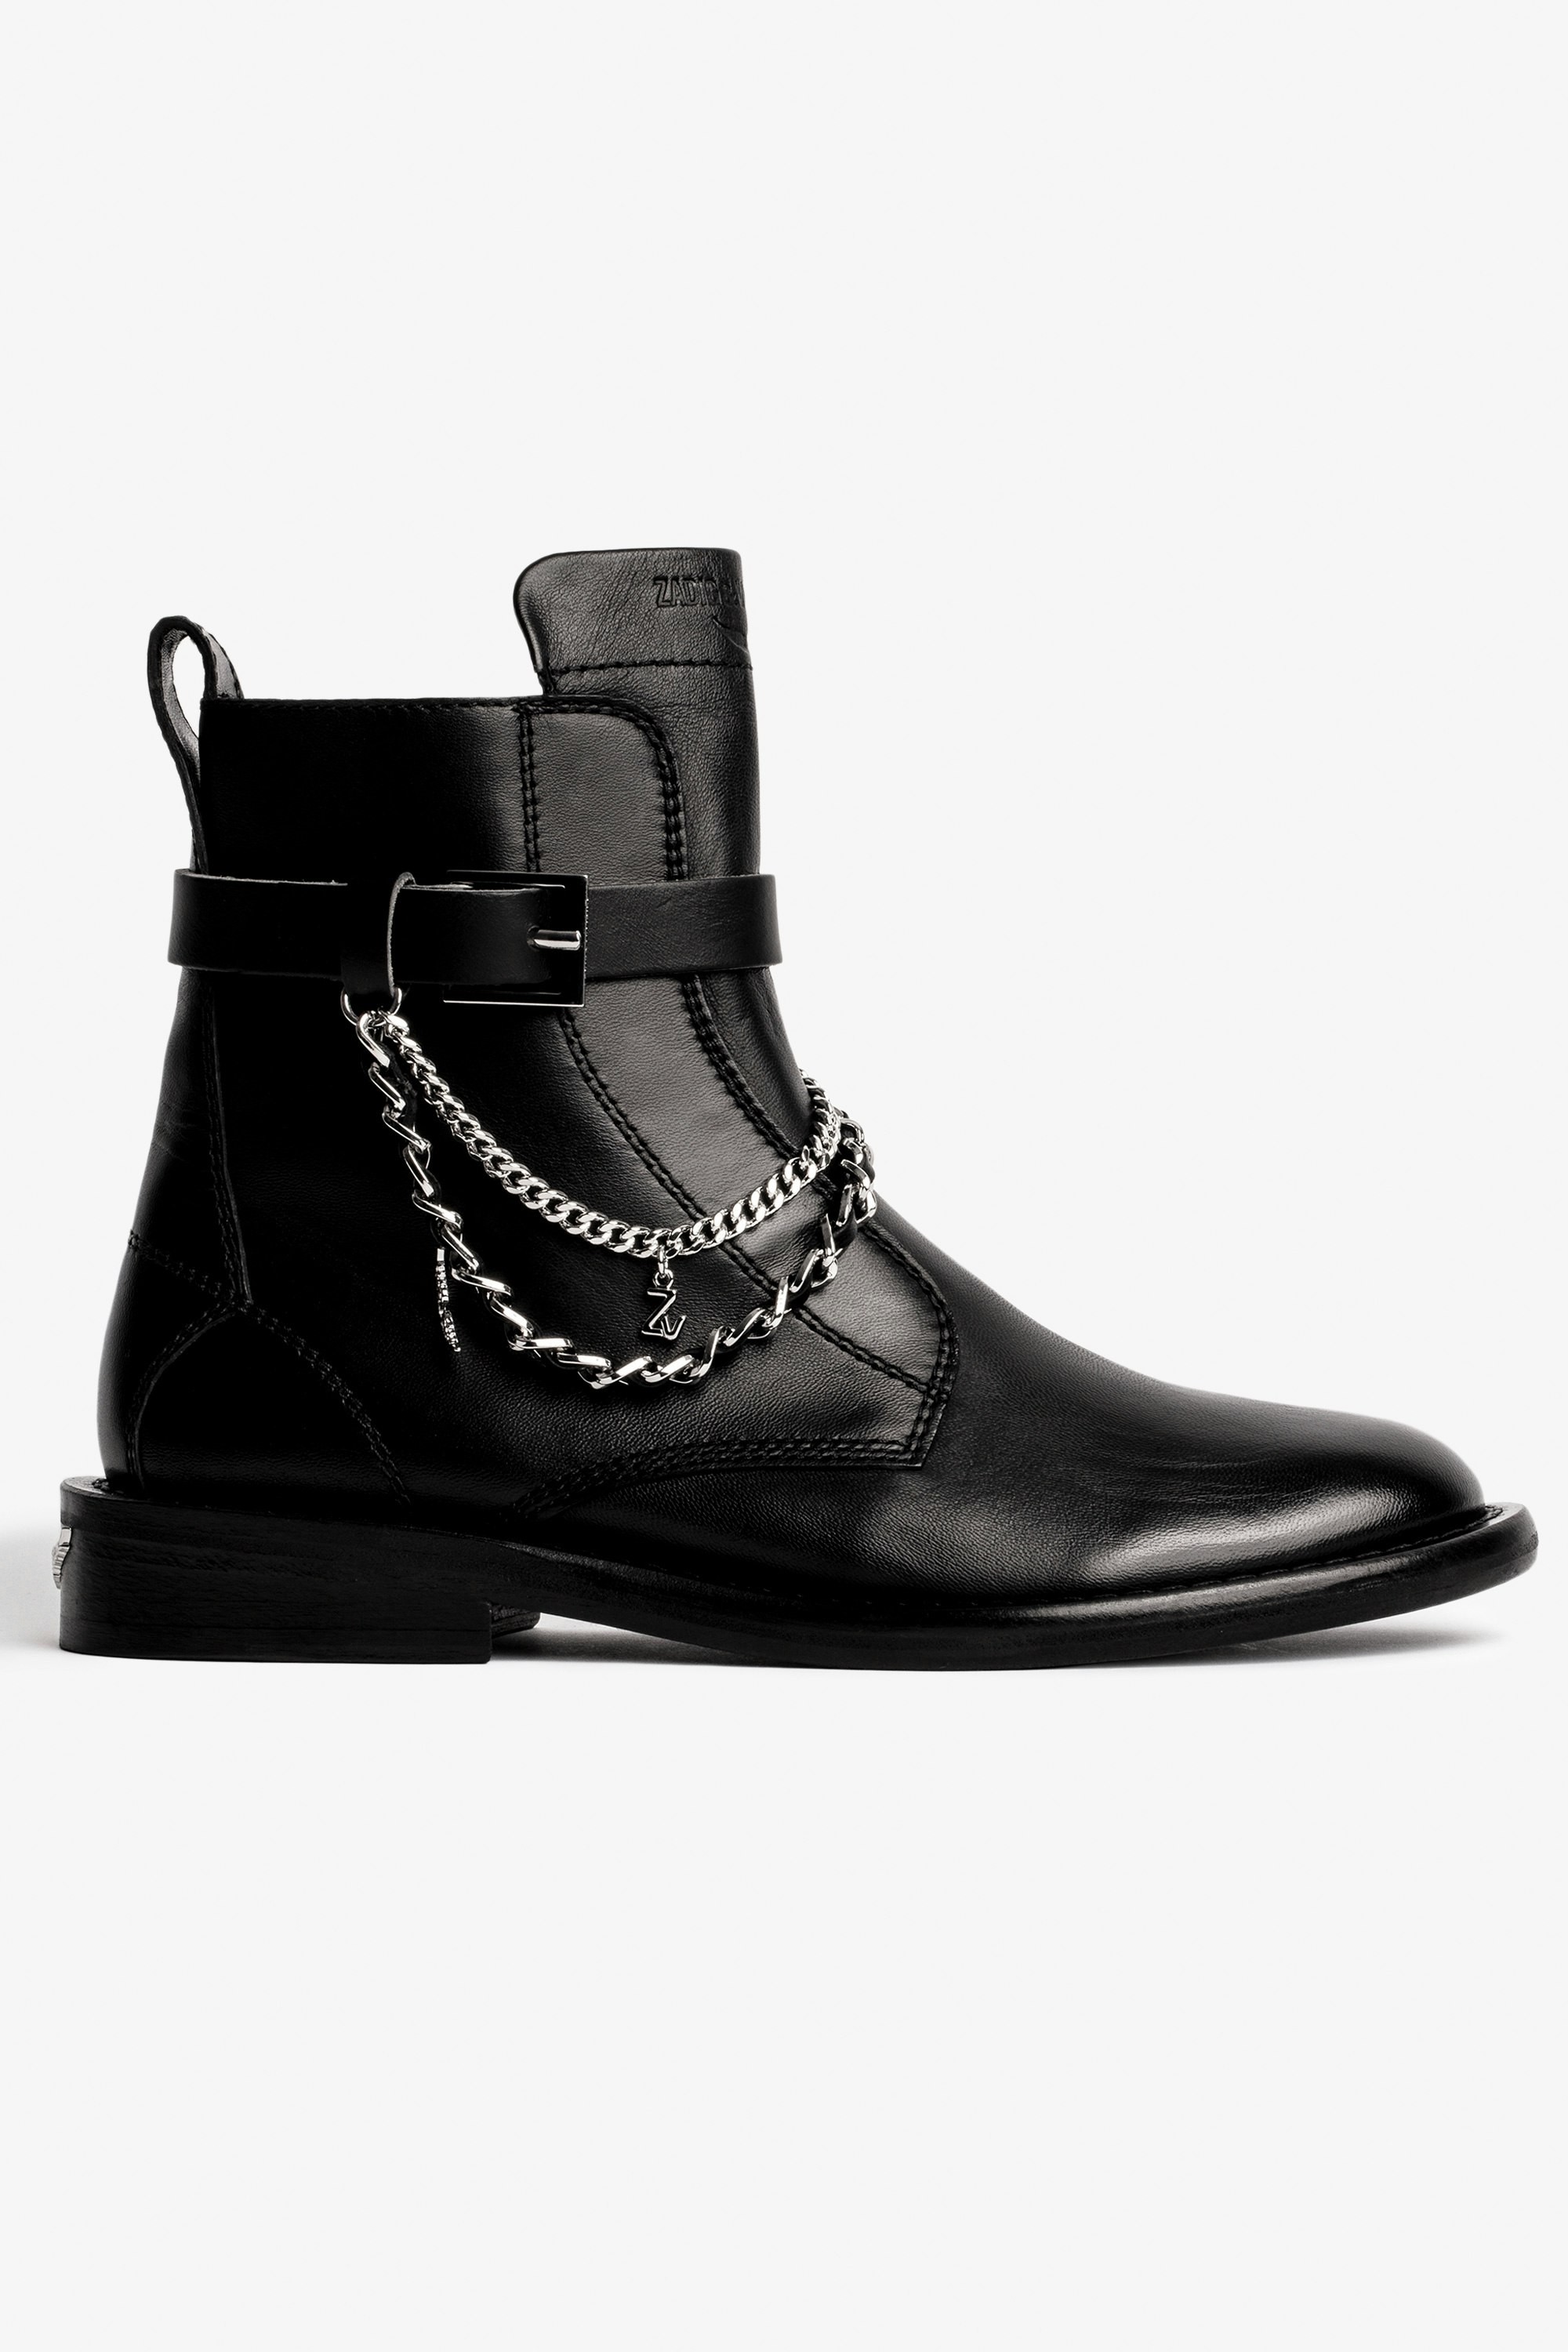 Laureen High Ankle Boots Women’s black leather ankle boots decorated with chains